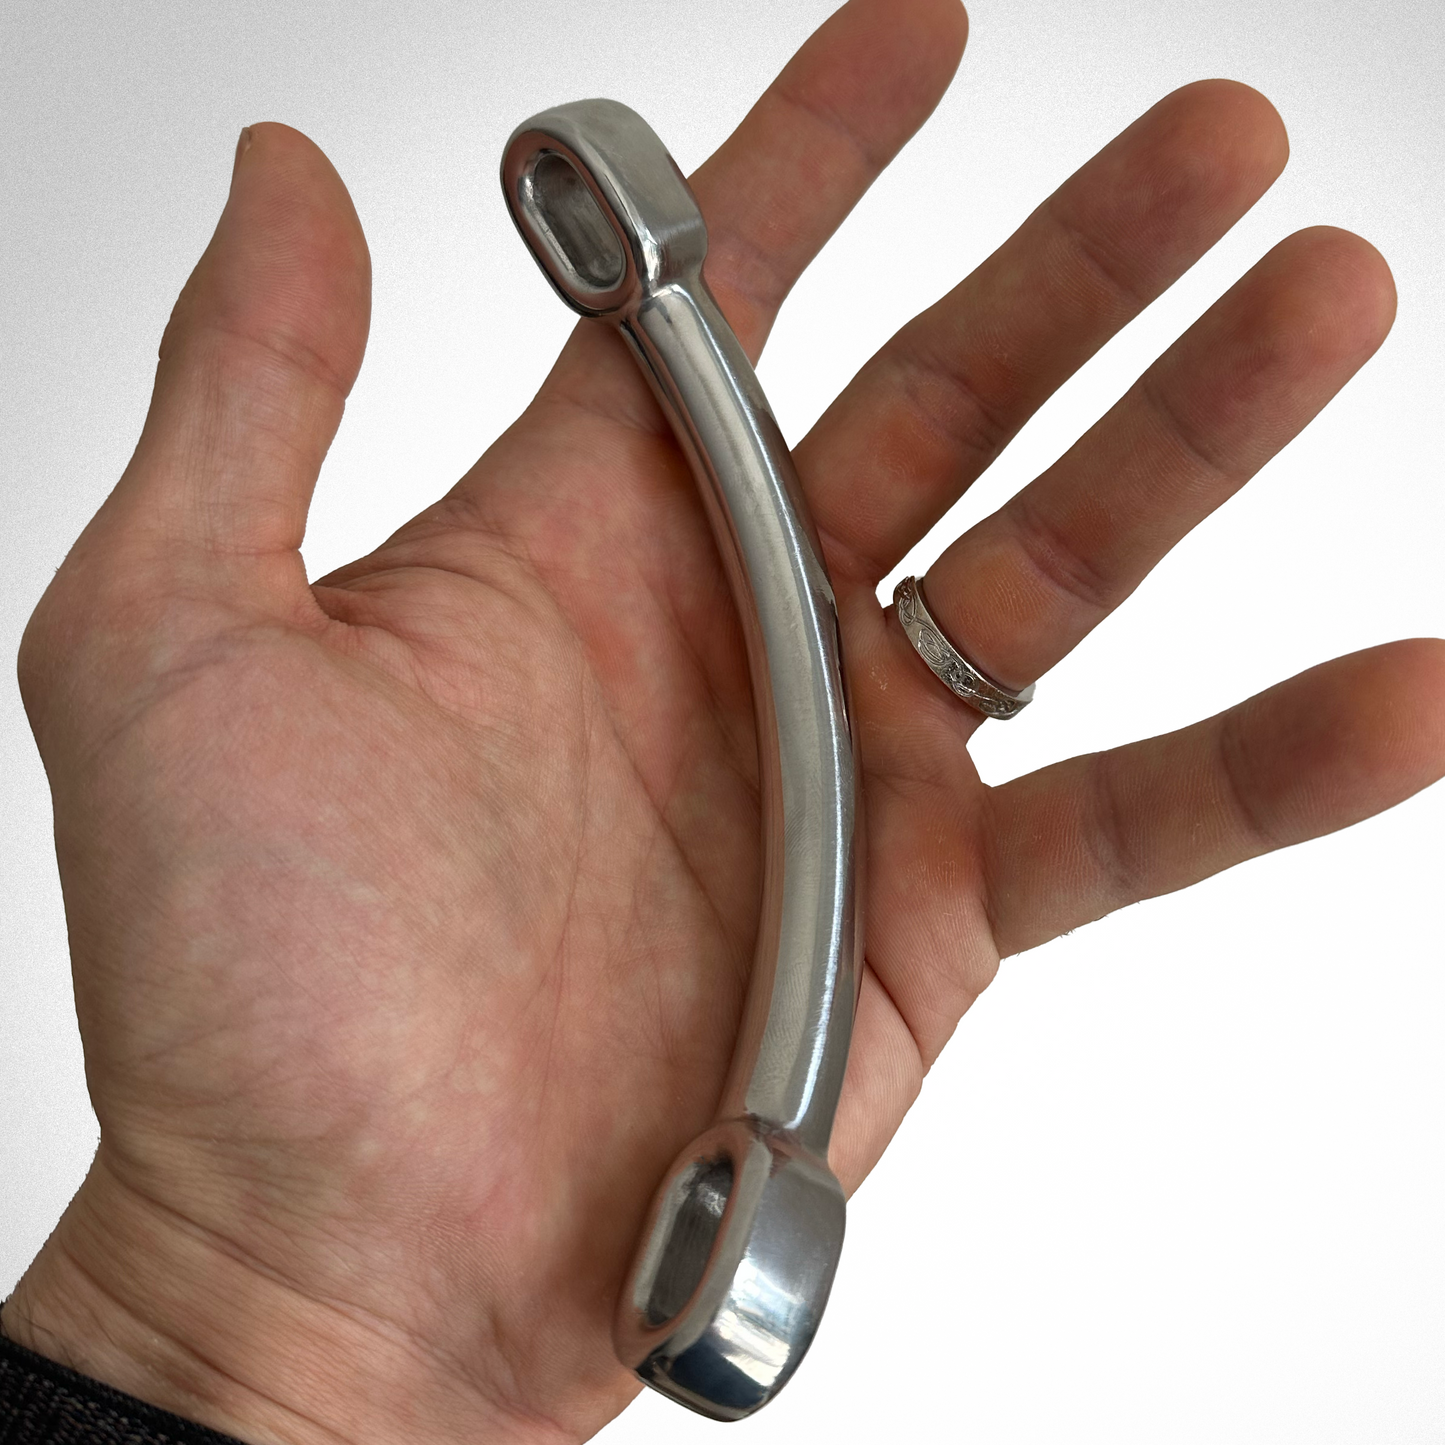 Picture of one rod in the palm of a hand. The rod is about the same size as the hand.